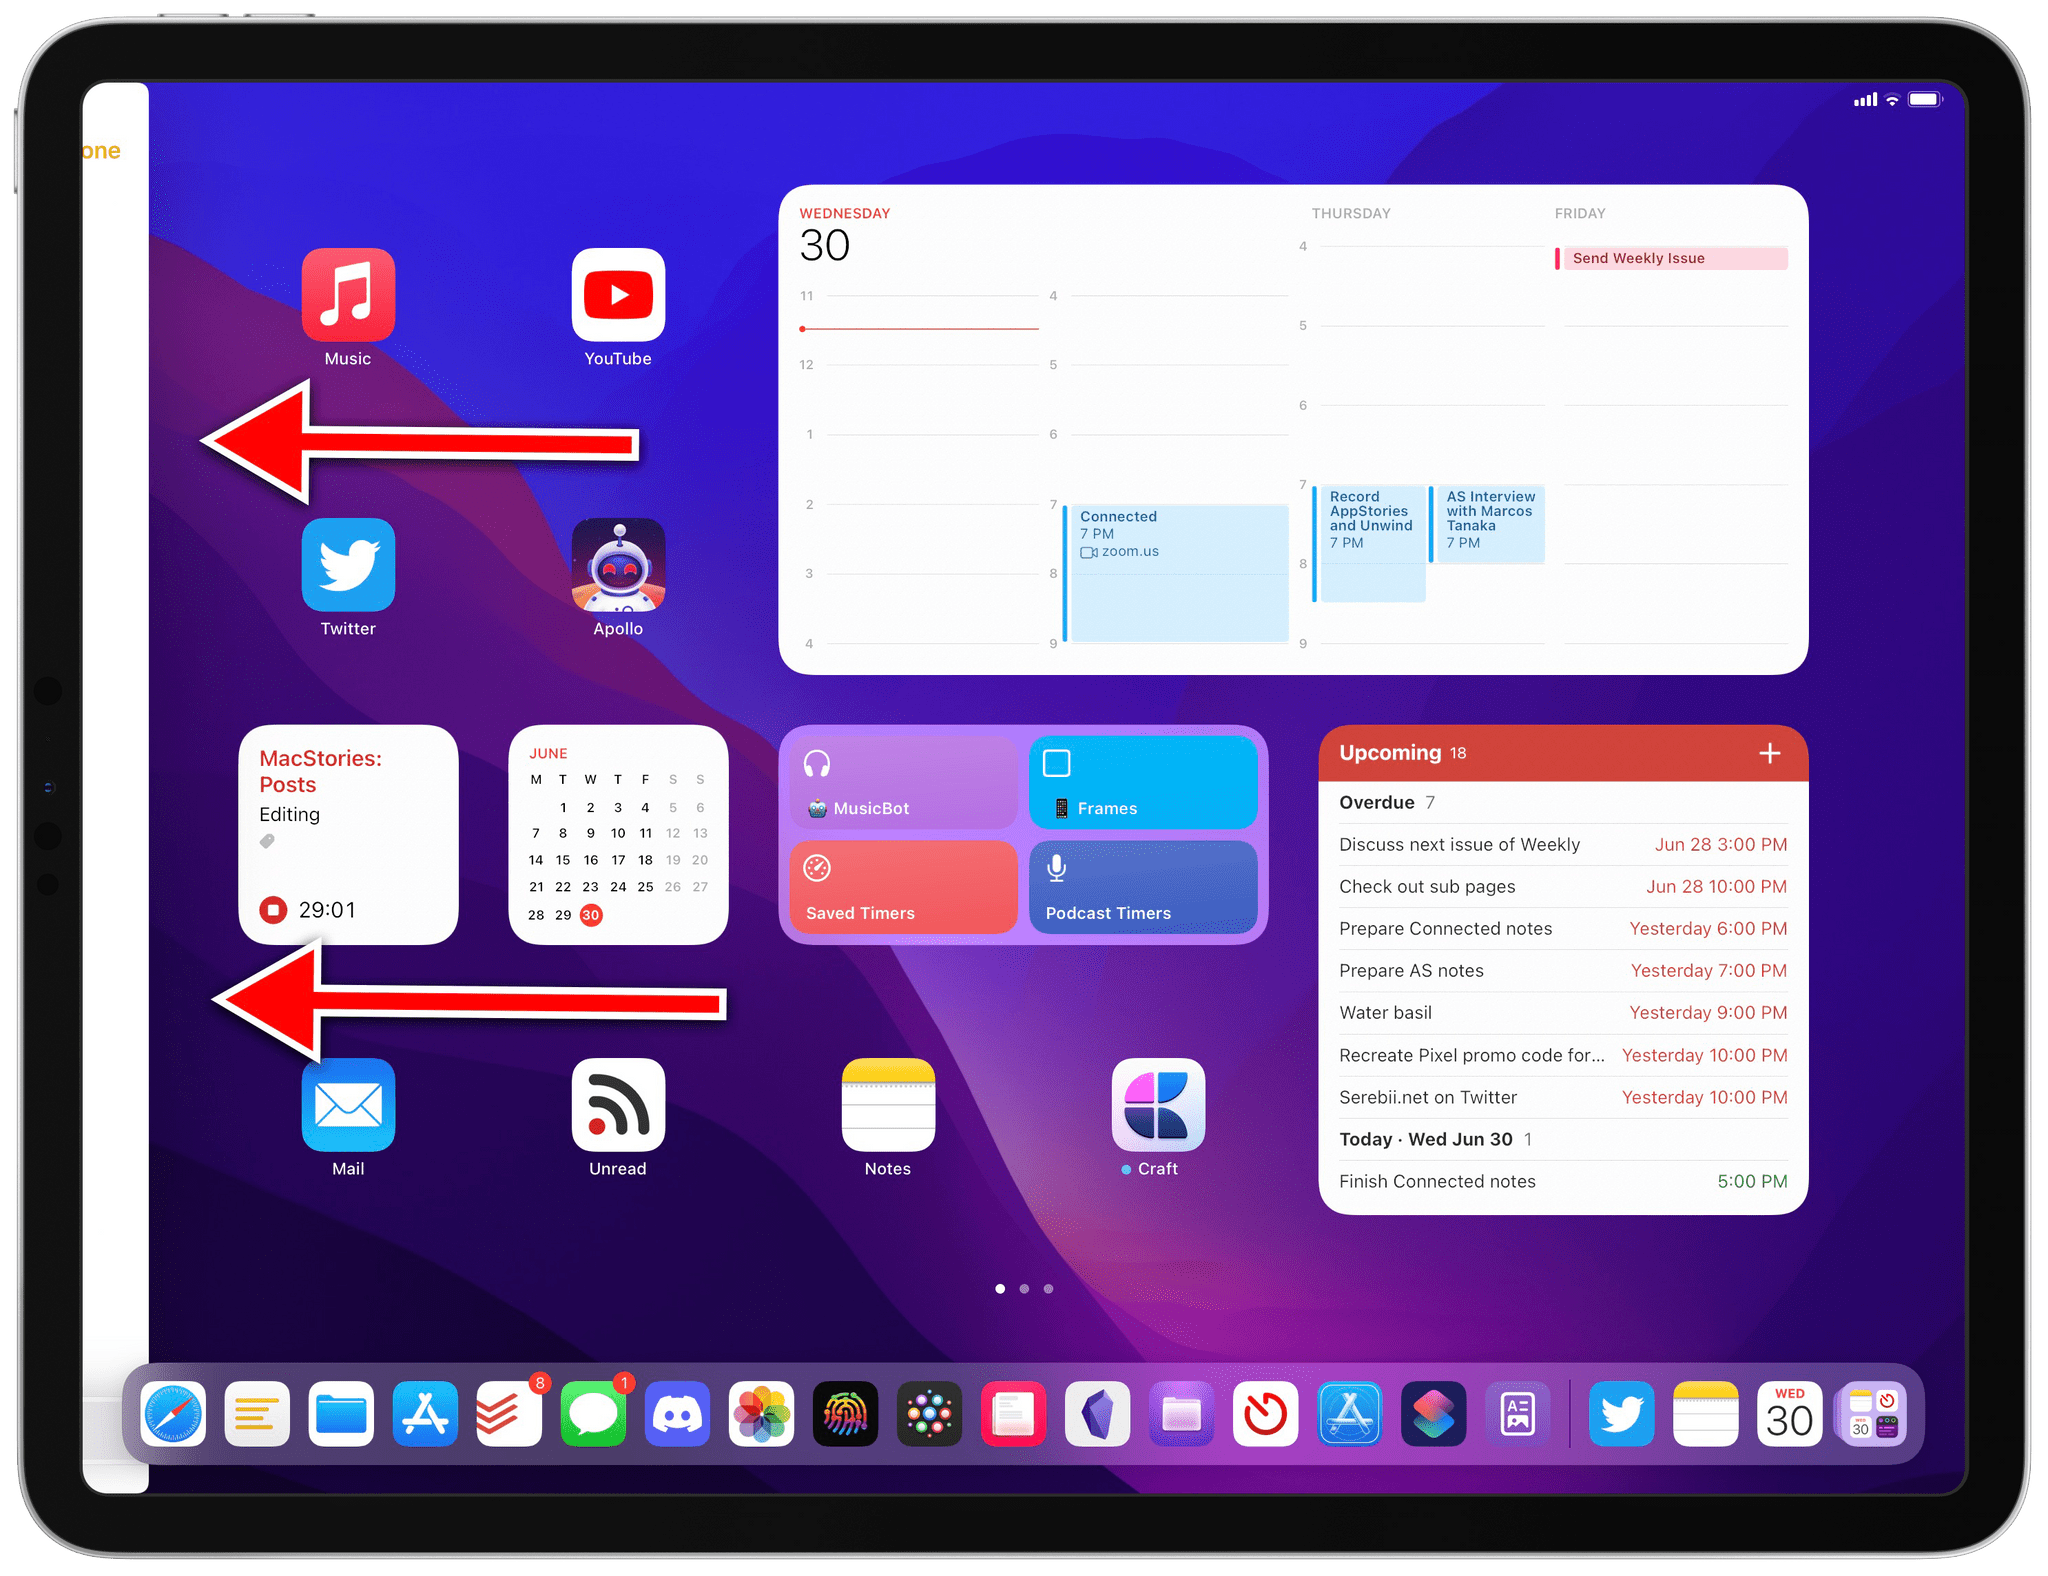 When you tile a window on one side of the screen, it hides in the corner to let you pick another app from the Home Screen...